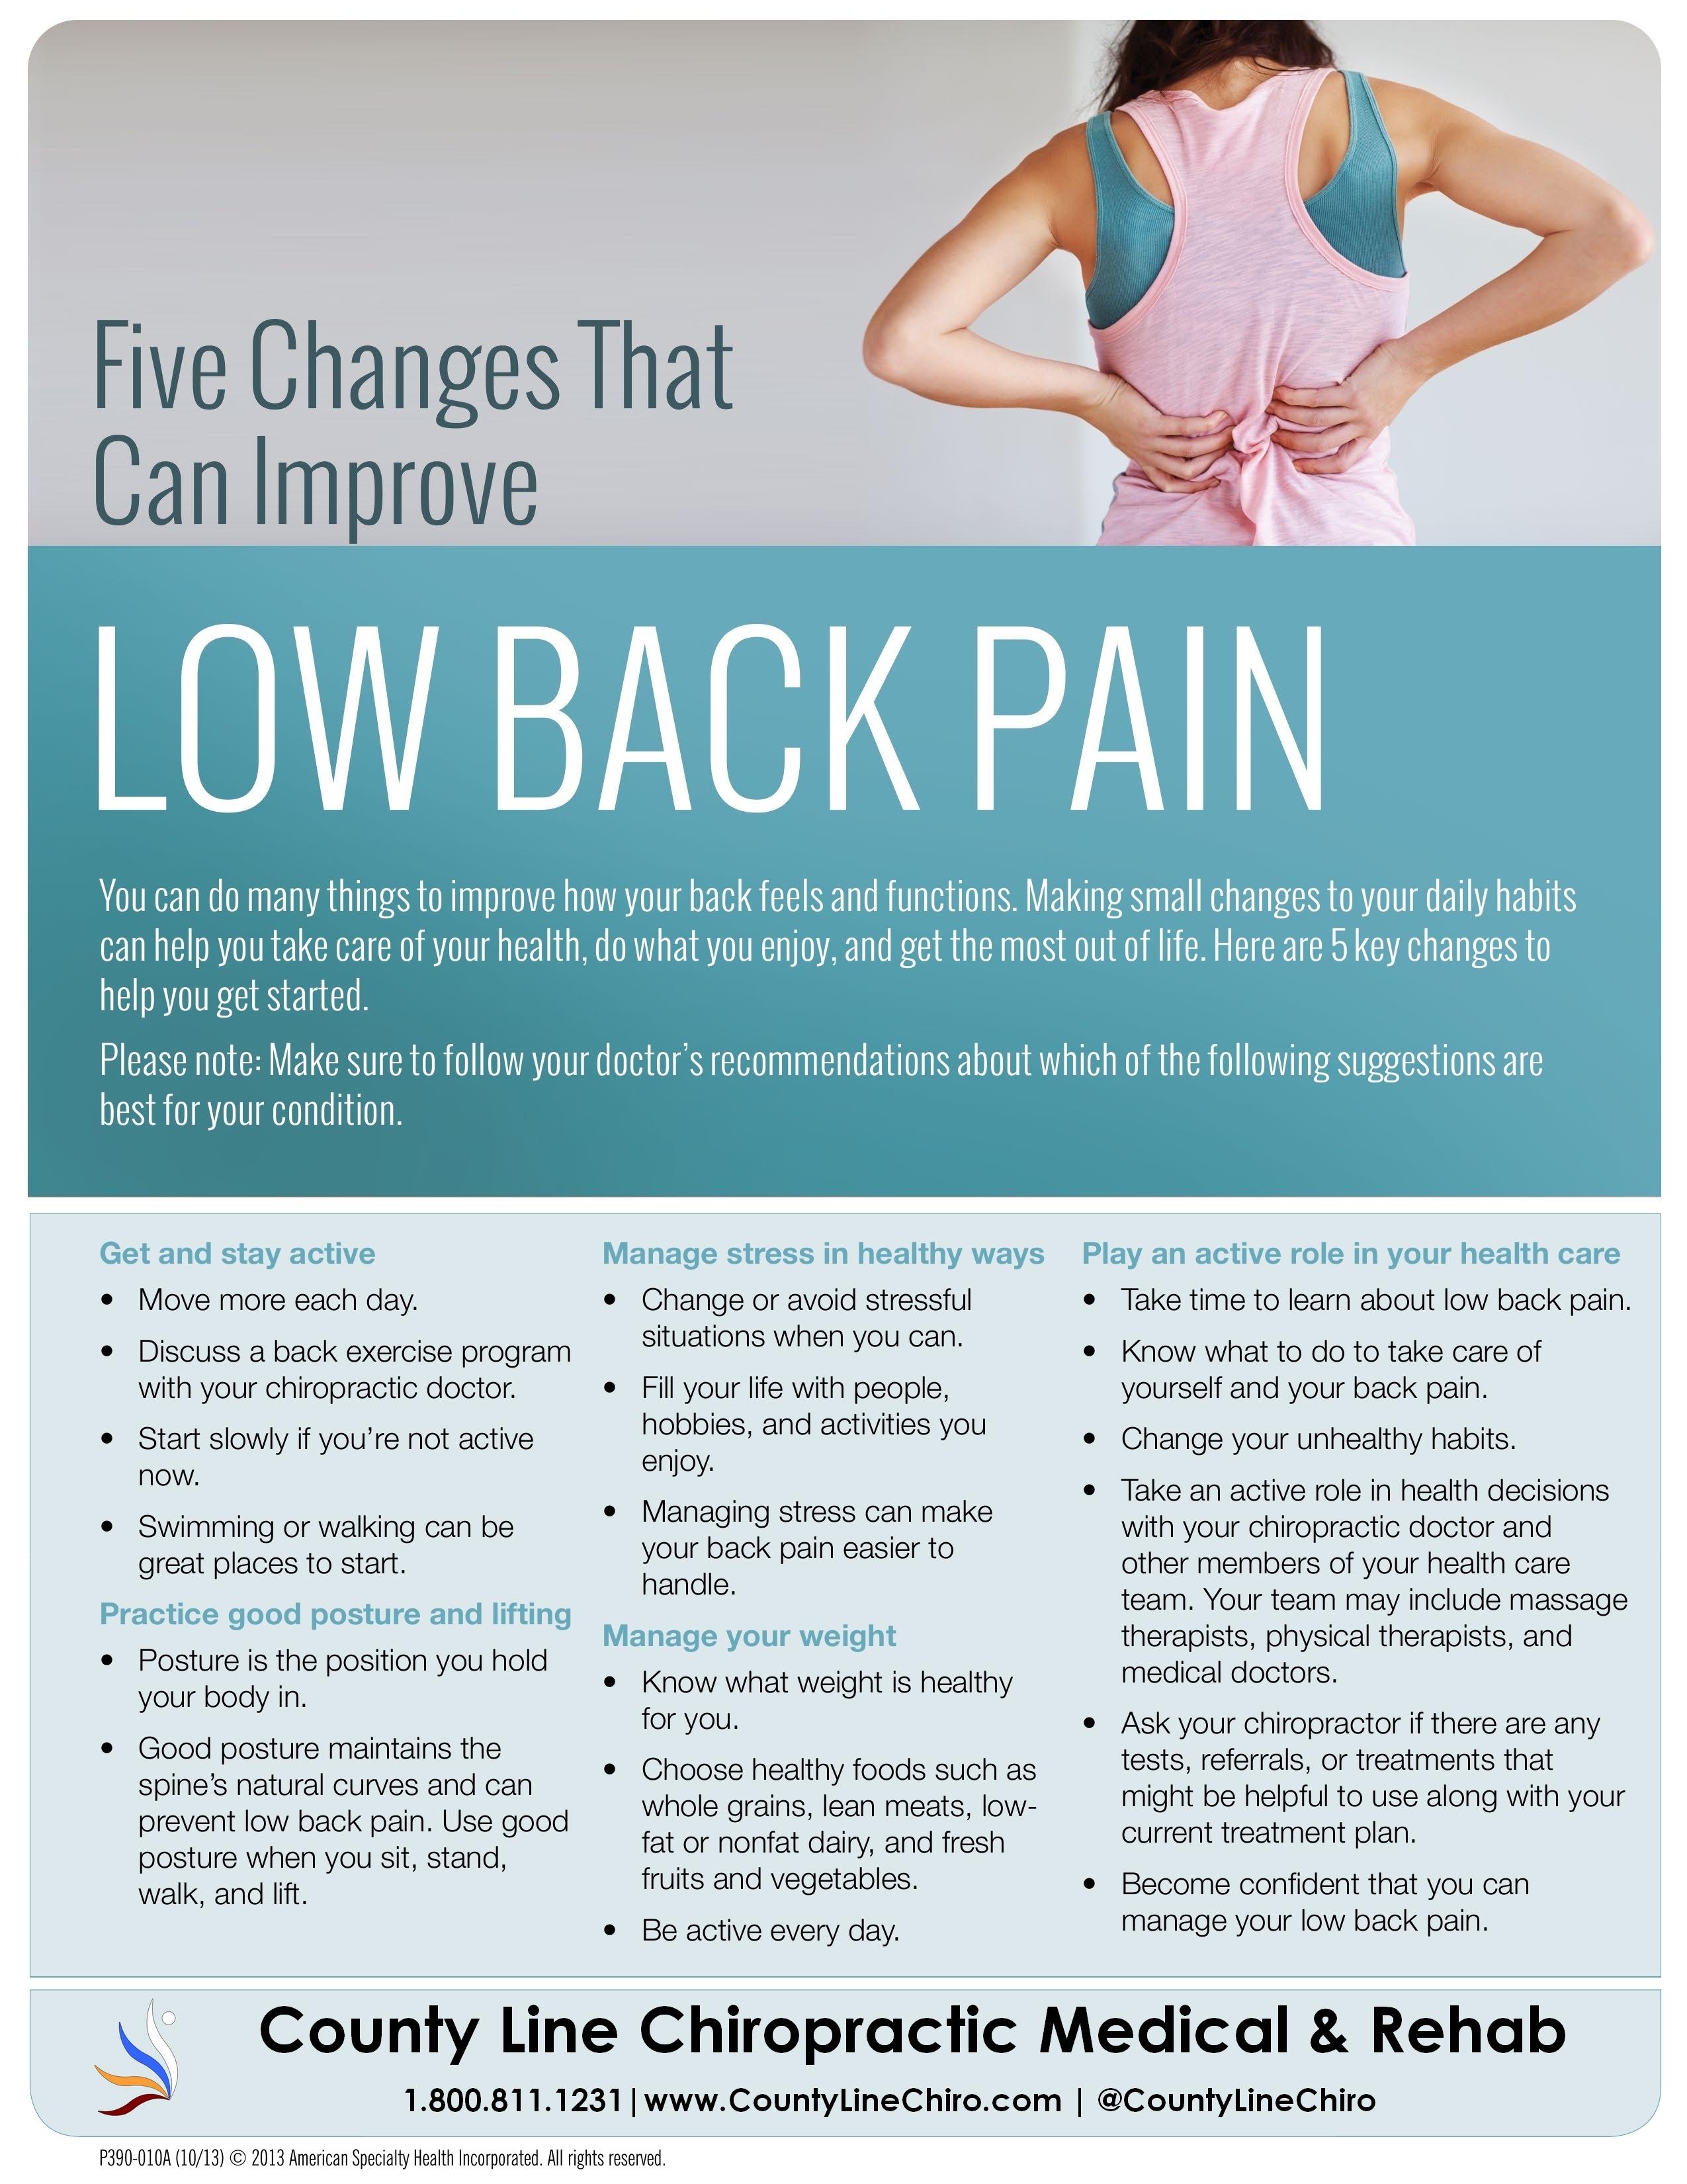 When Lower Back Pain After a Workout Is Cause for Concern